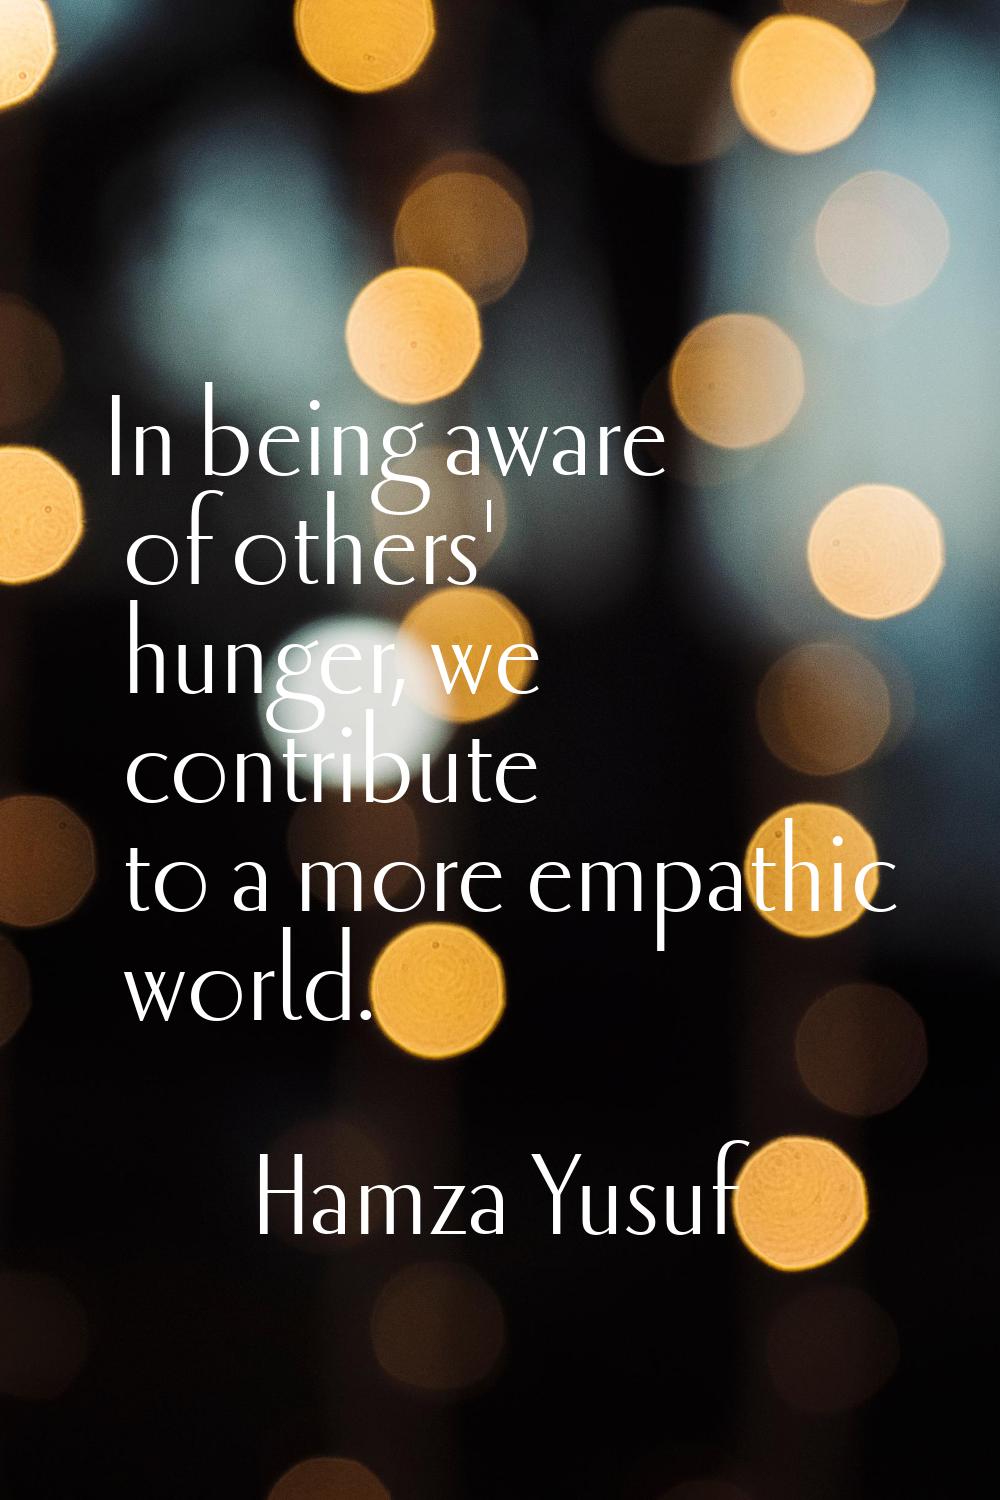 In being aware of others' hunger, we contribute to a more empathic world.